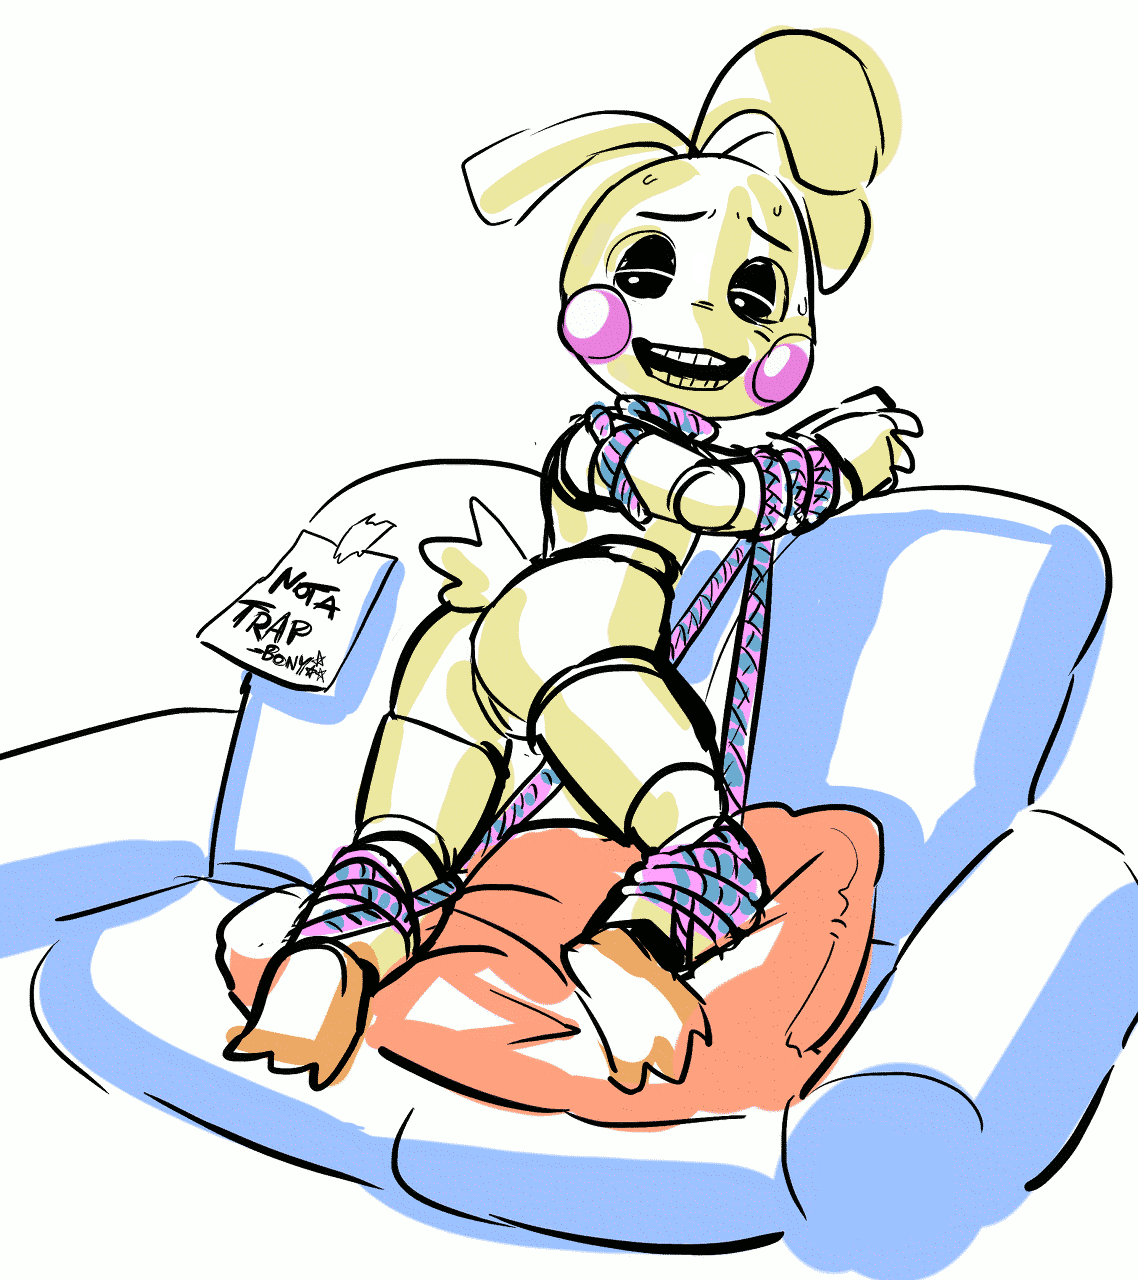 Toy chica bondage ❤️ Best adult photos at comics.theothertentacle